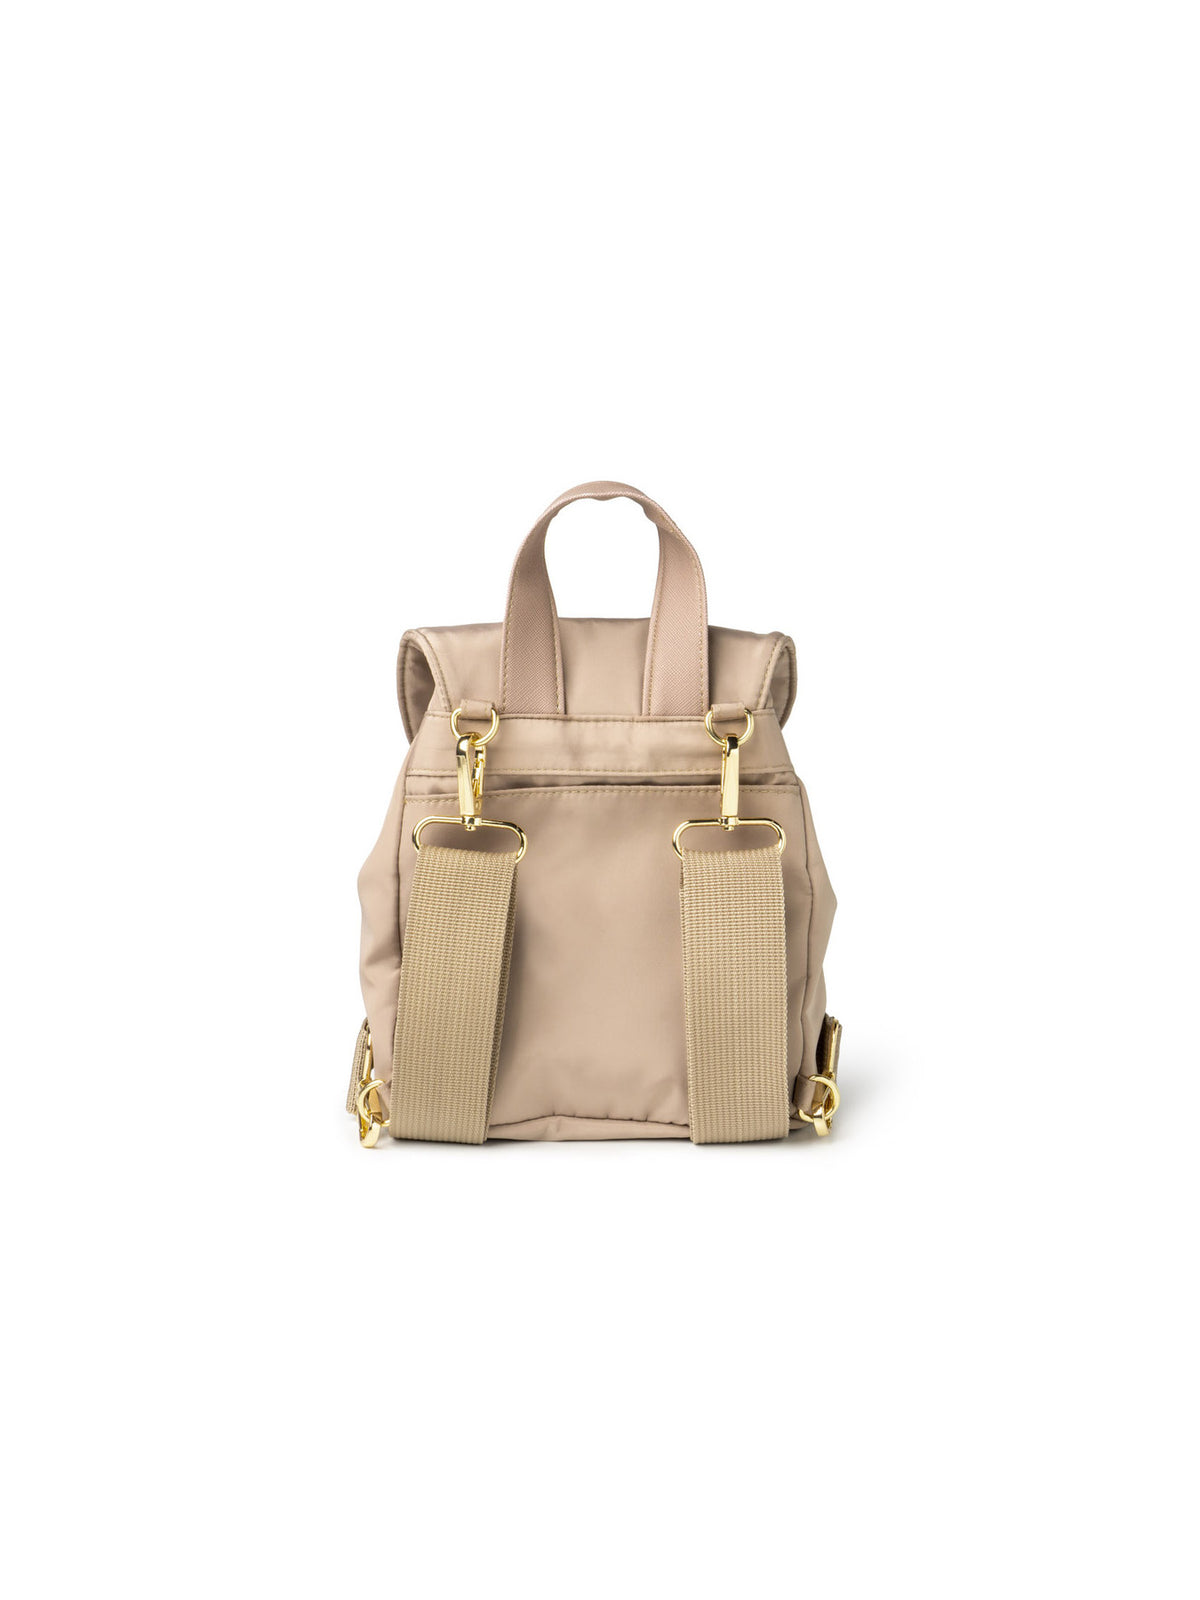 kedzie mali convertible backpack in taupe